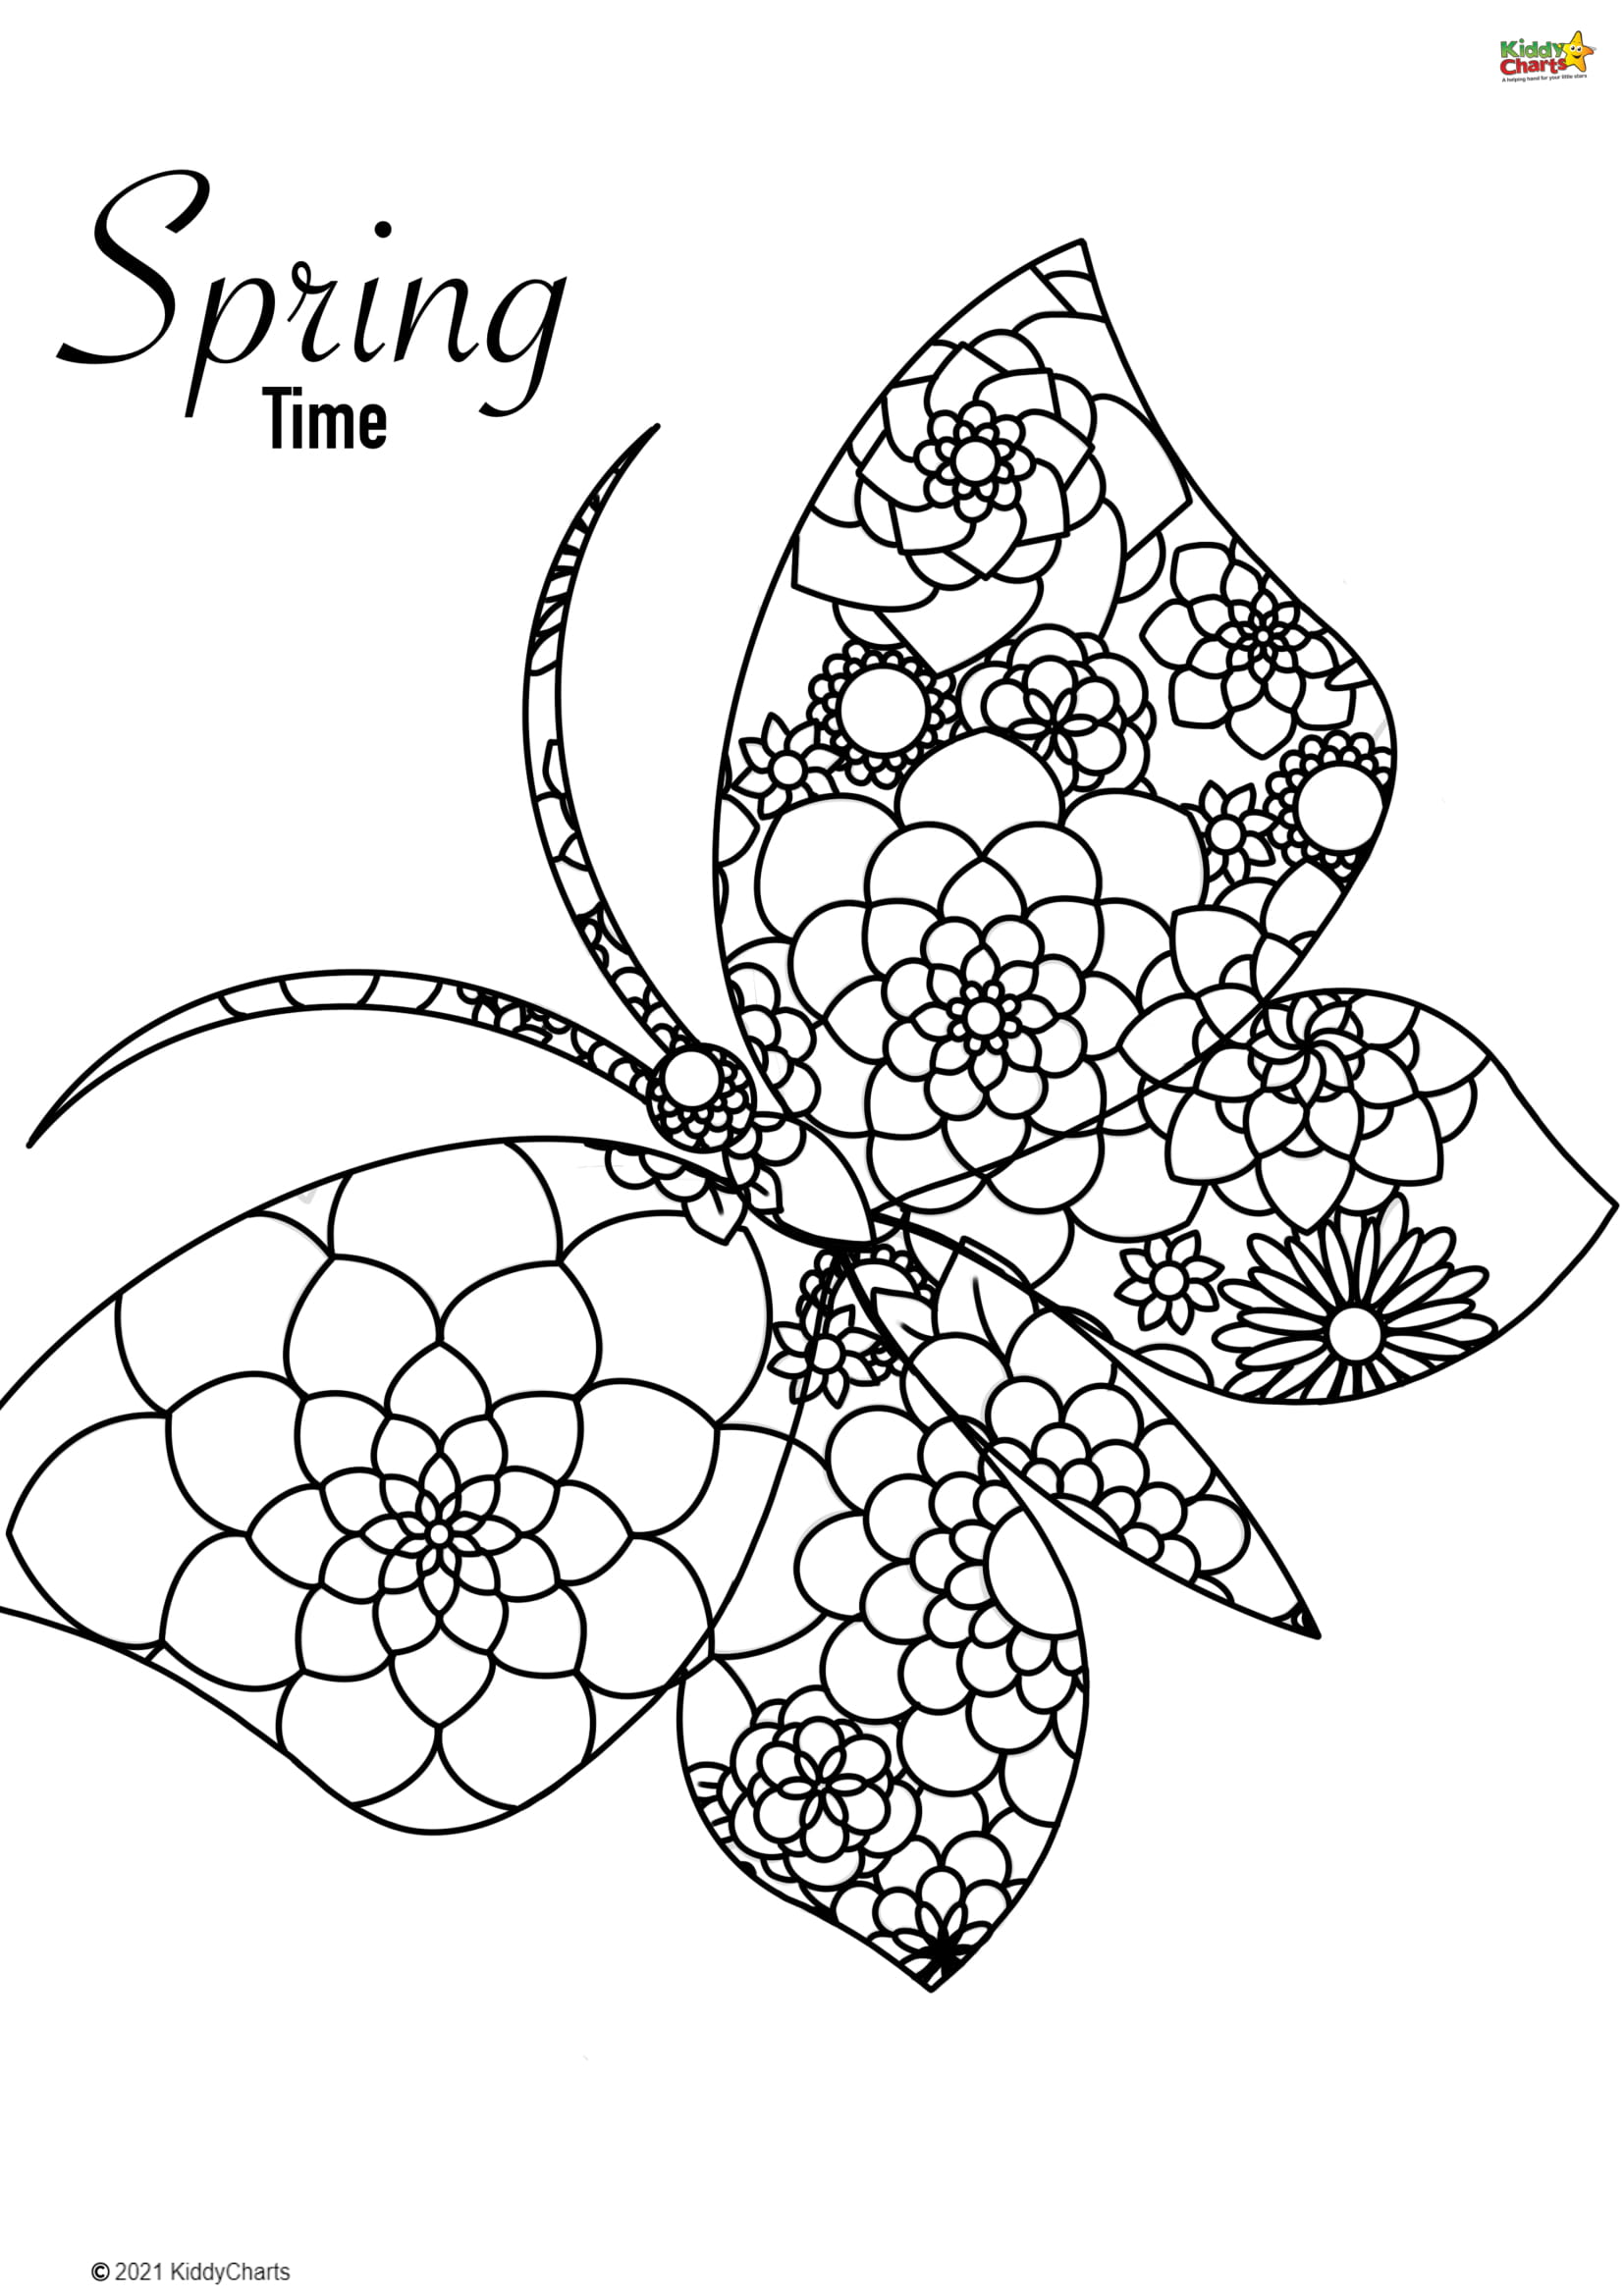 Spring Coloring Pages Fun Printable Kiddycharts